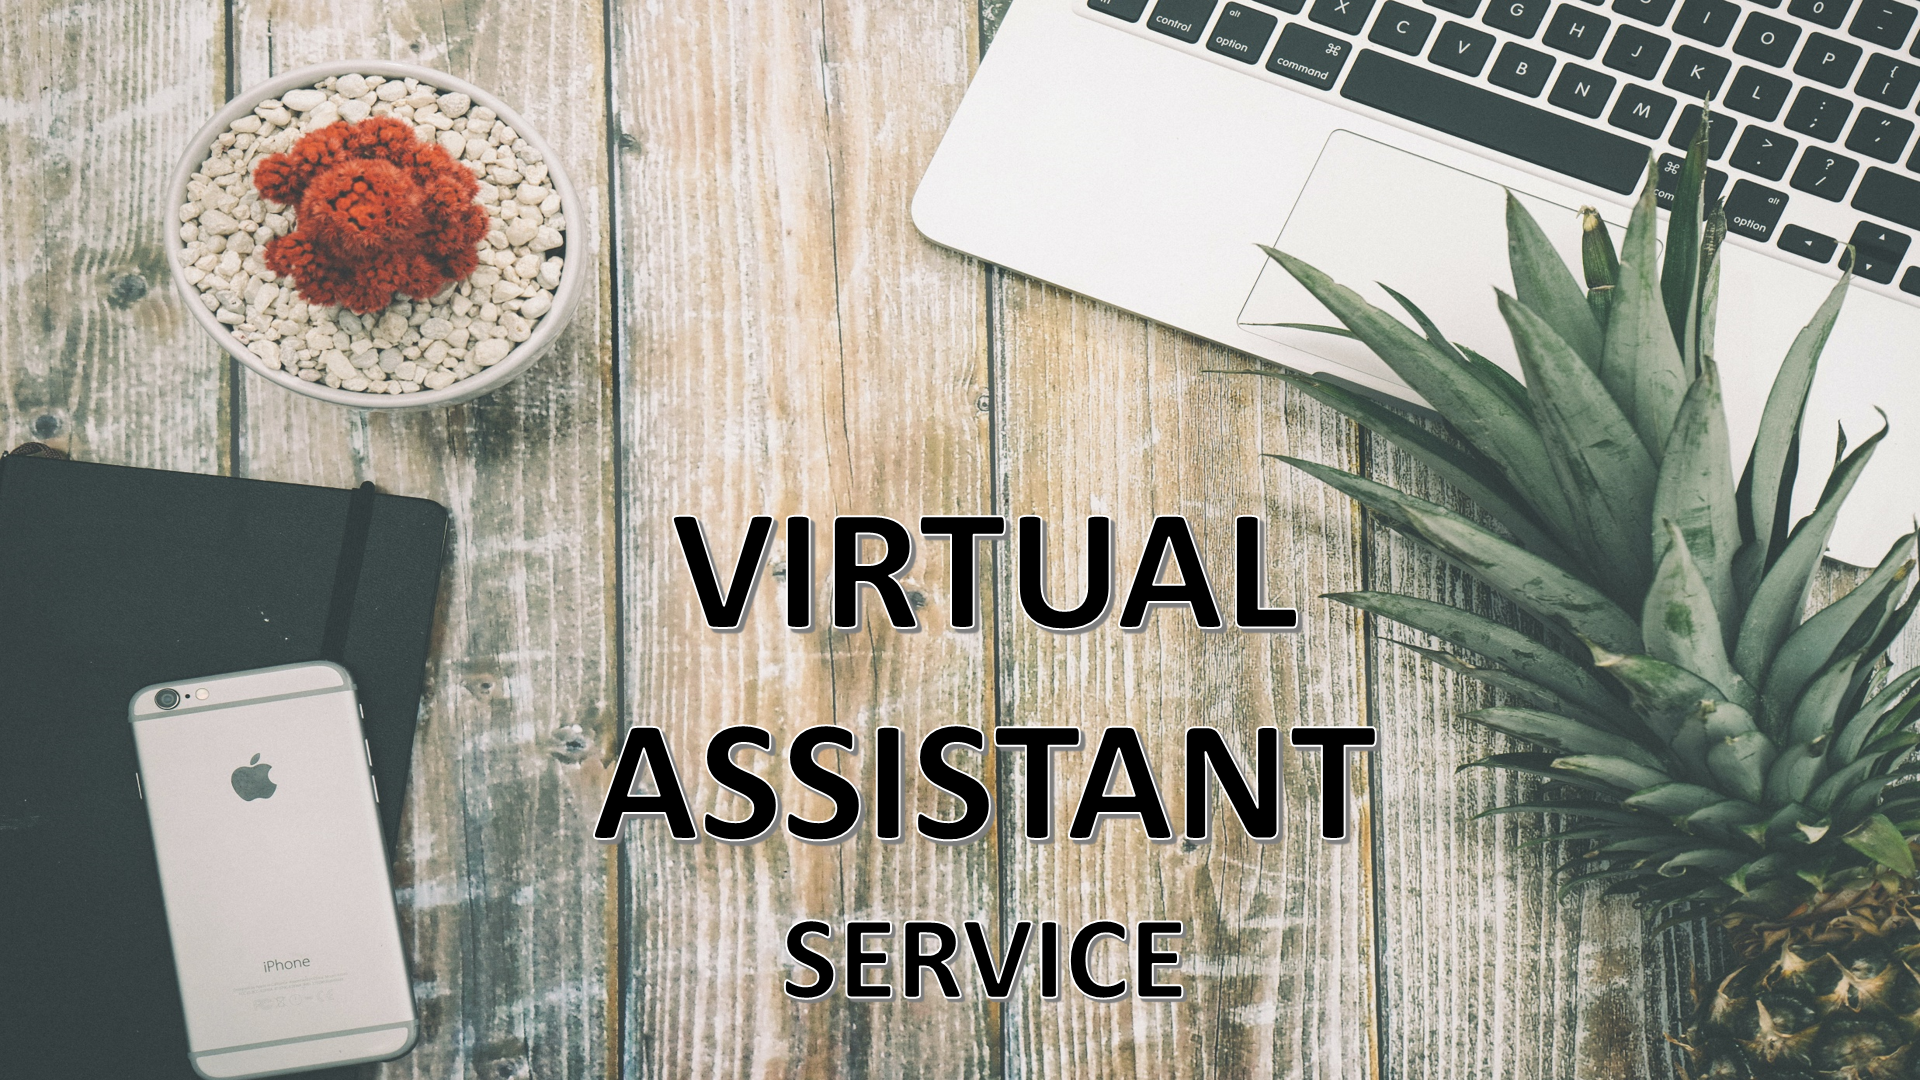 I will be your professional virtual assistant for Excel, web research and Data entry for $1